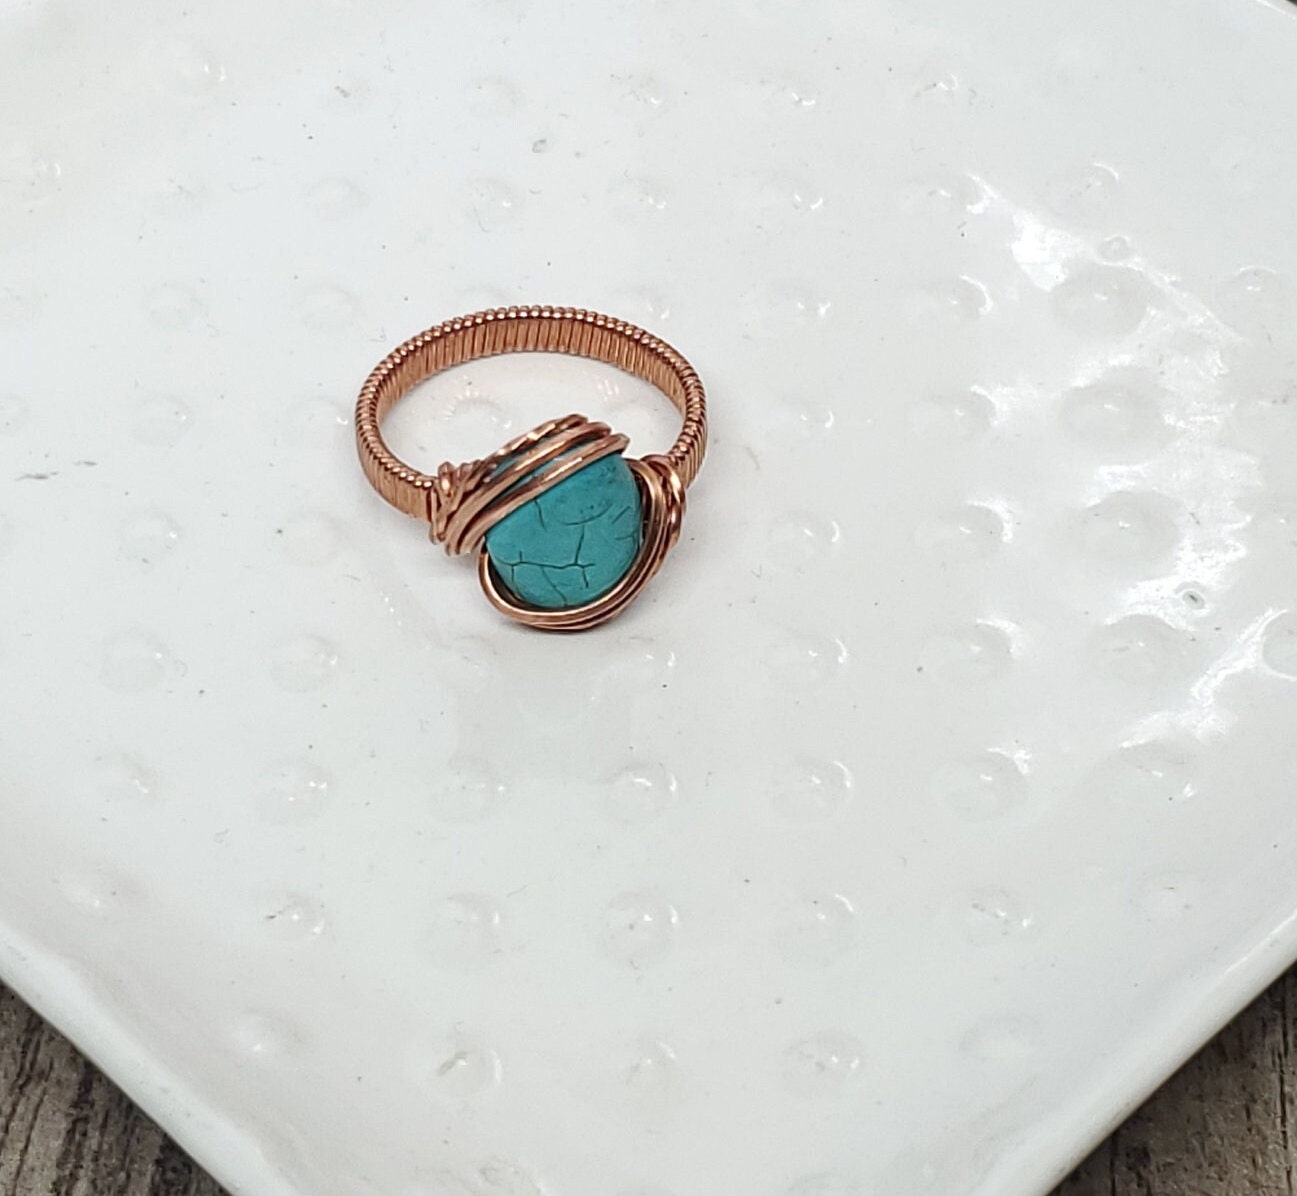 Size 10 Dyed Howlite ring - Faux Turquoise - dyed gemstone - copper ring - 7th anniversary